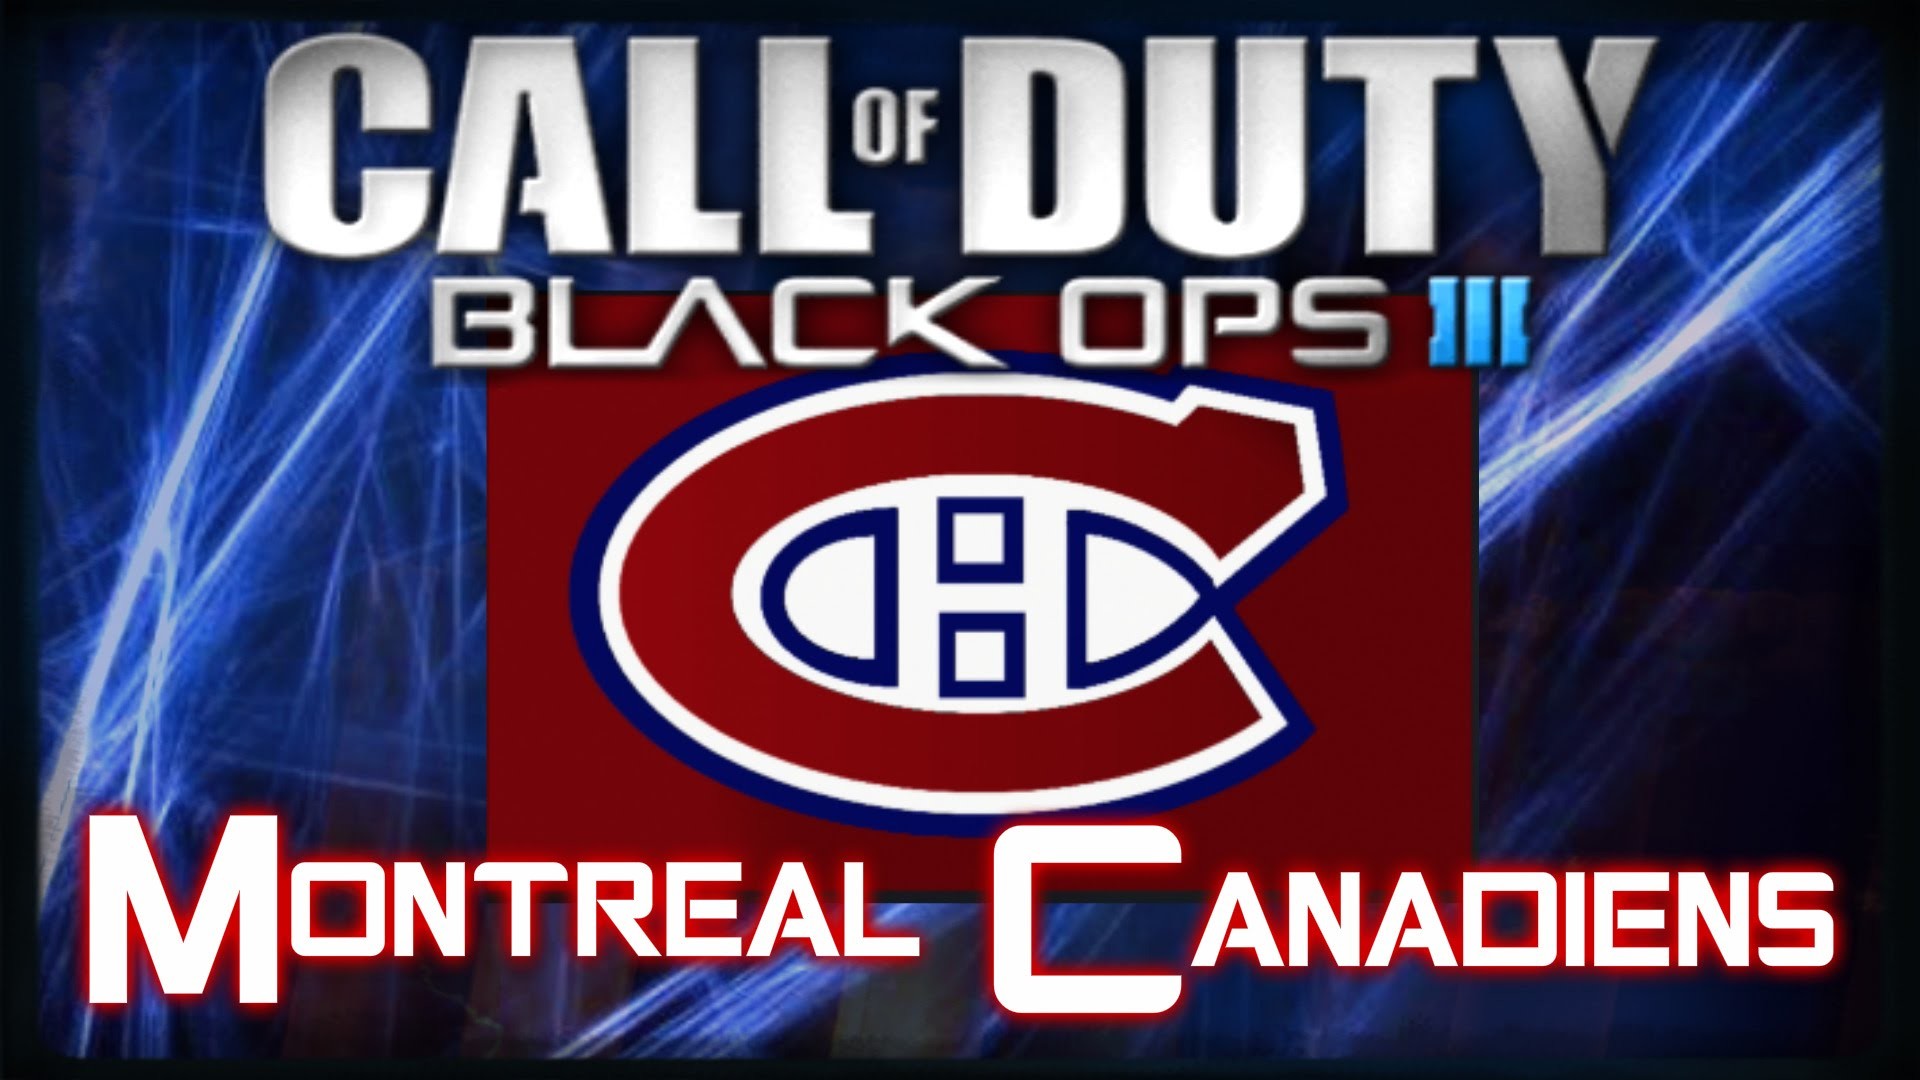 1920x1080 Montreal Canadiens (NHL Hockey) - Call of Duty Black Ops 3 Emblem Tutorial  | By A Hooded Psycho - YouTube